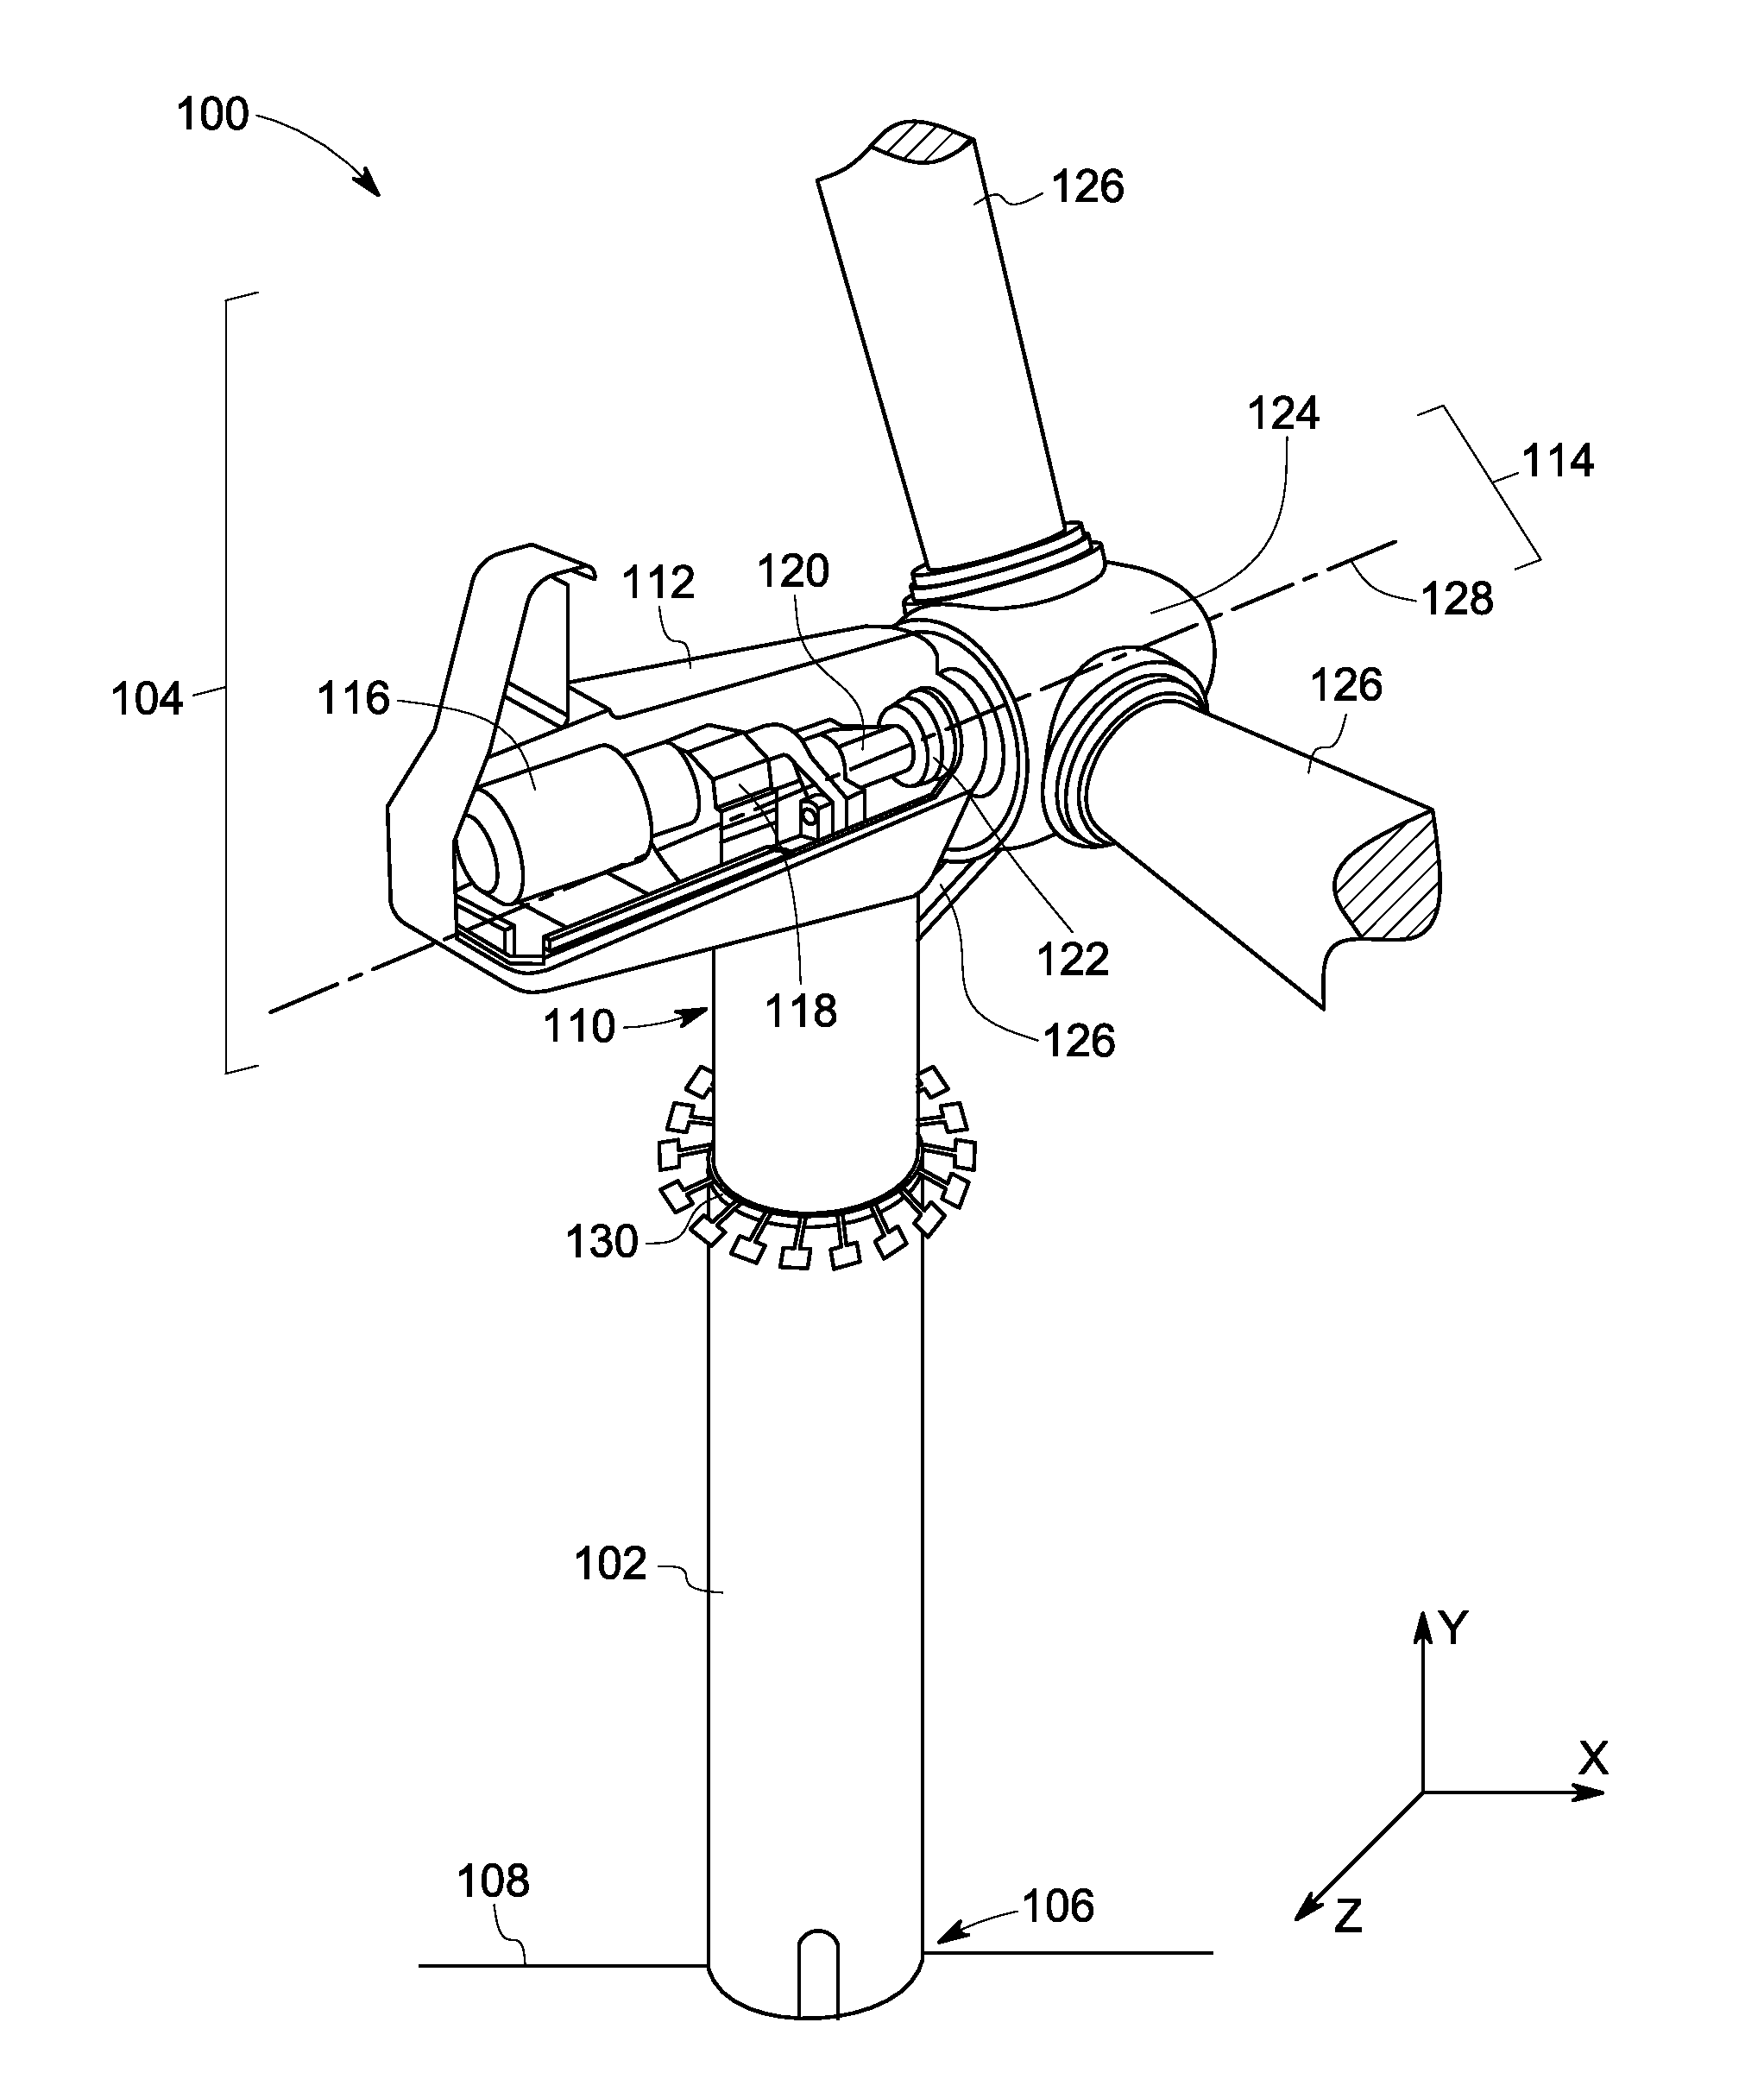 Systems and methods for attenuating noise in a wind turbine